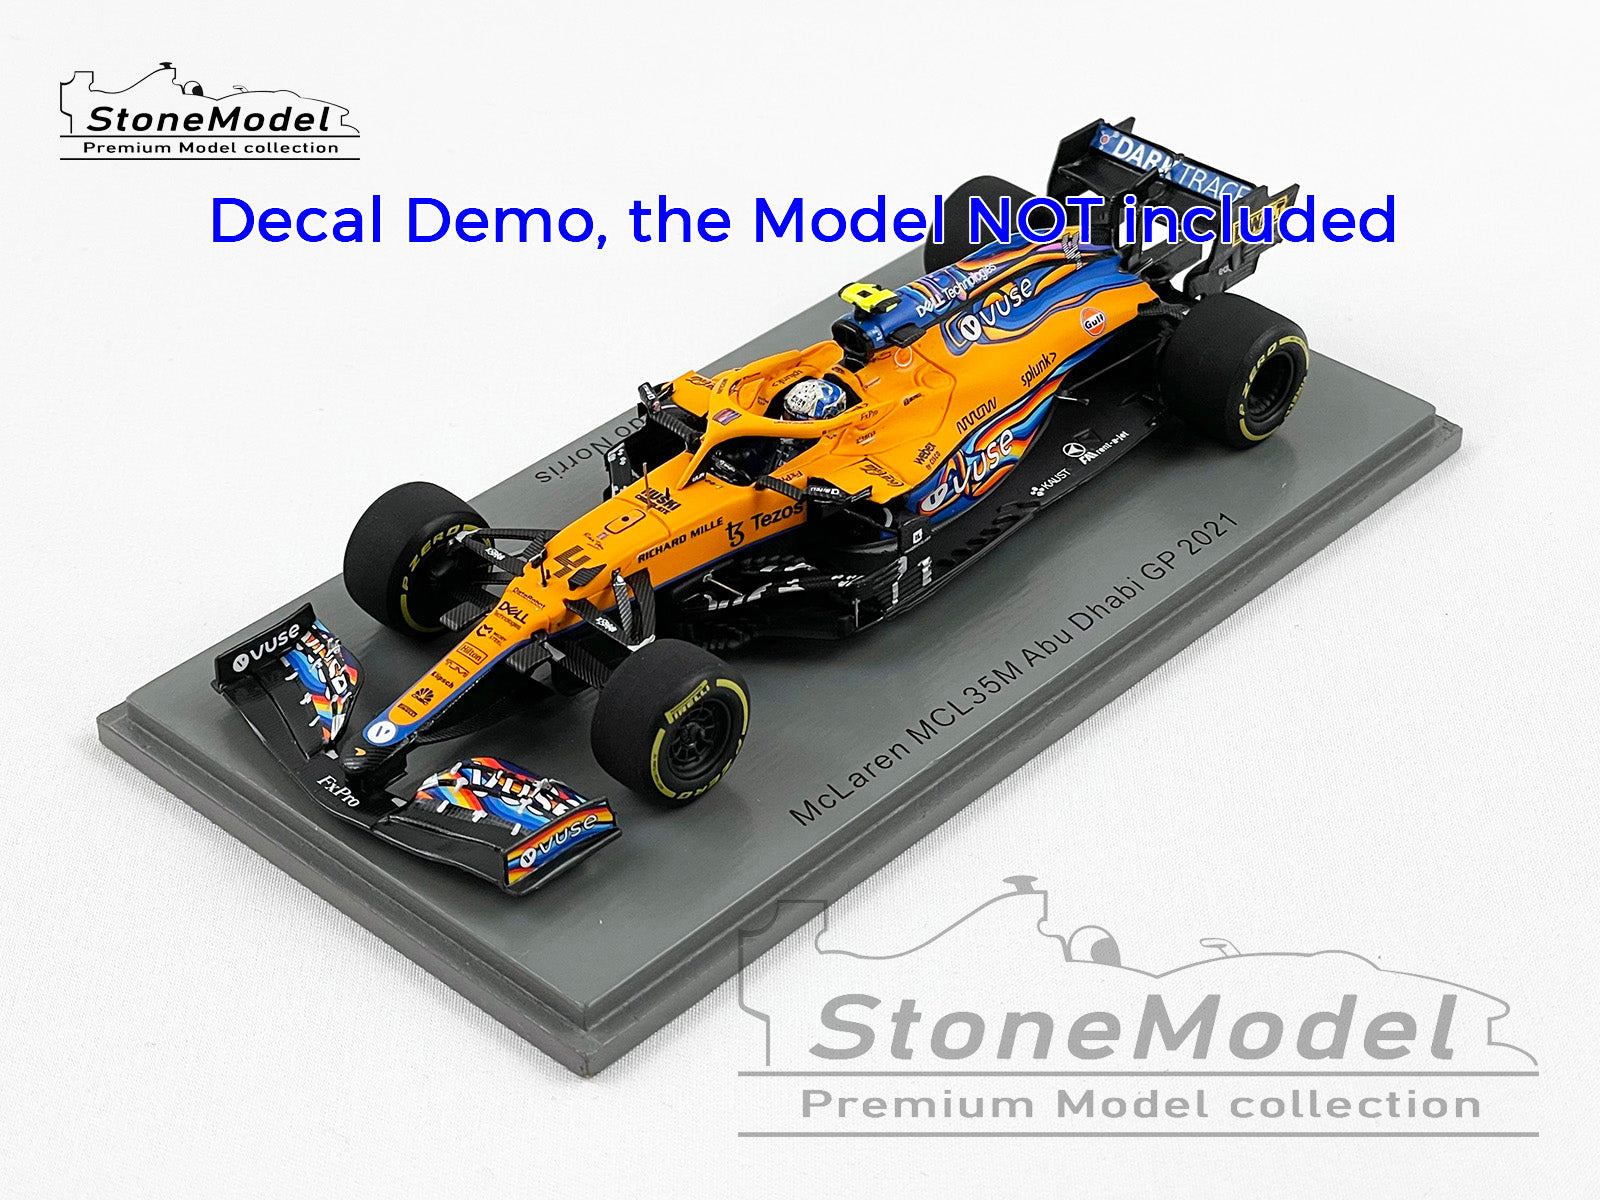 Decal for 1:43 Art Livery Mclaren F1 MCL35M Abu Dhabi 2021 